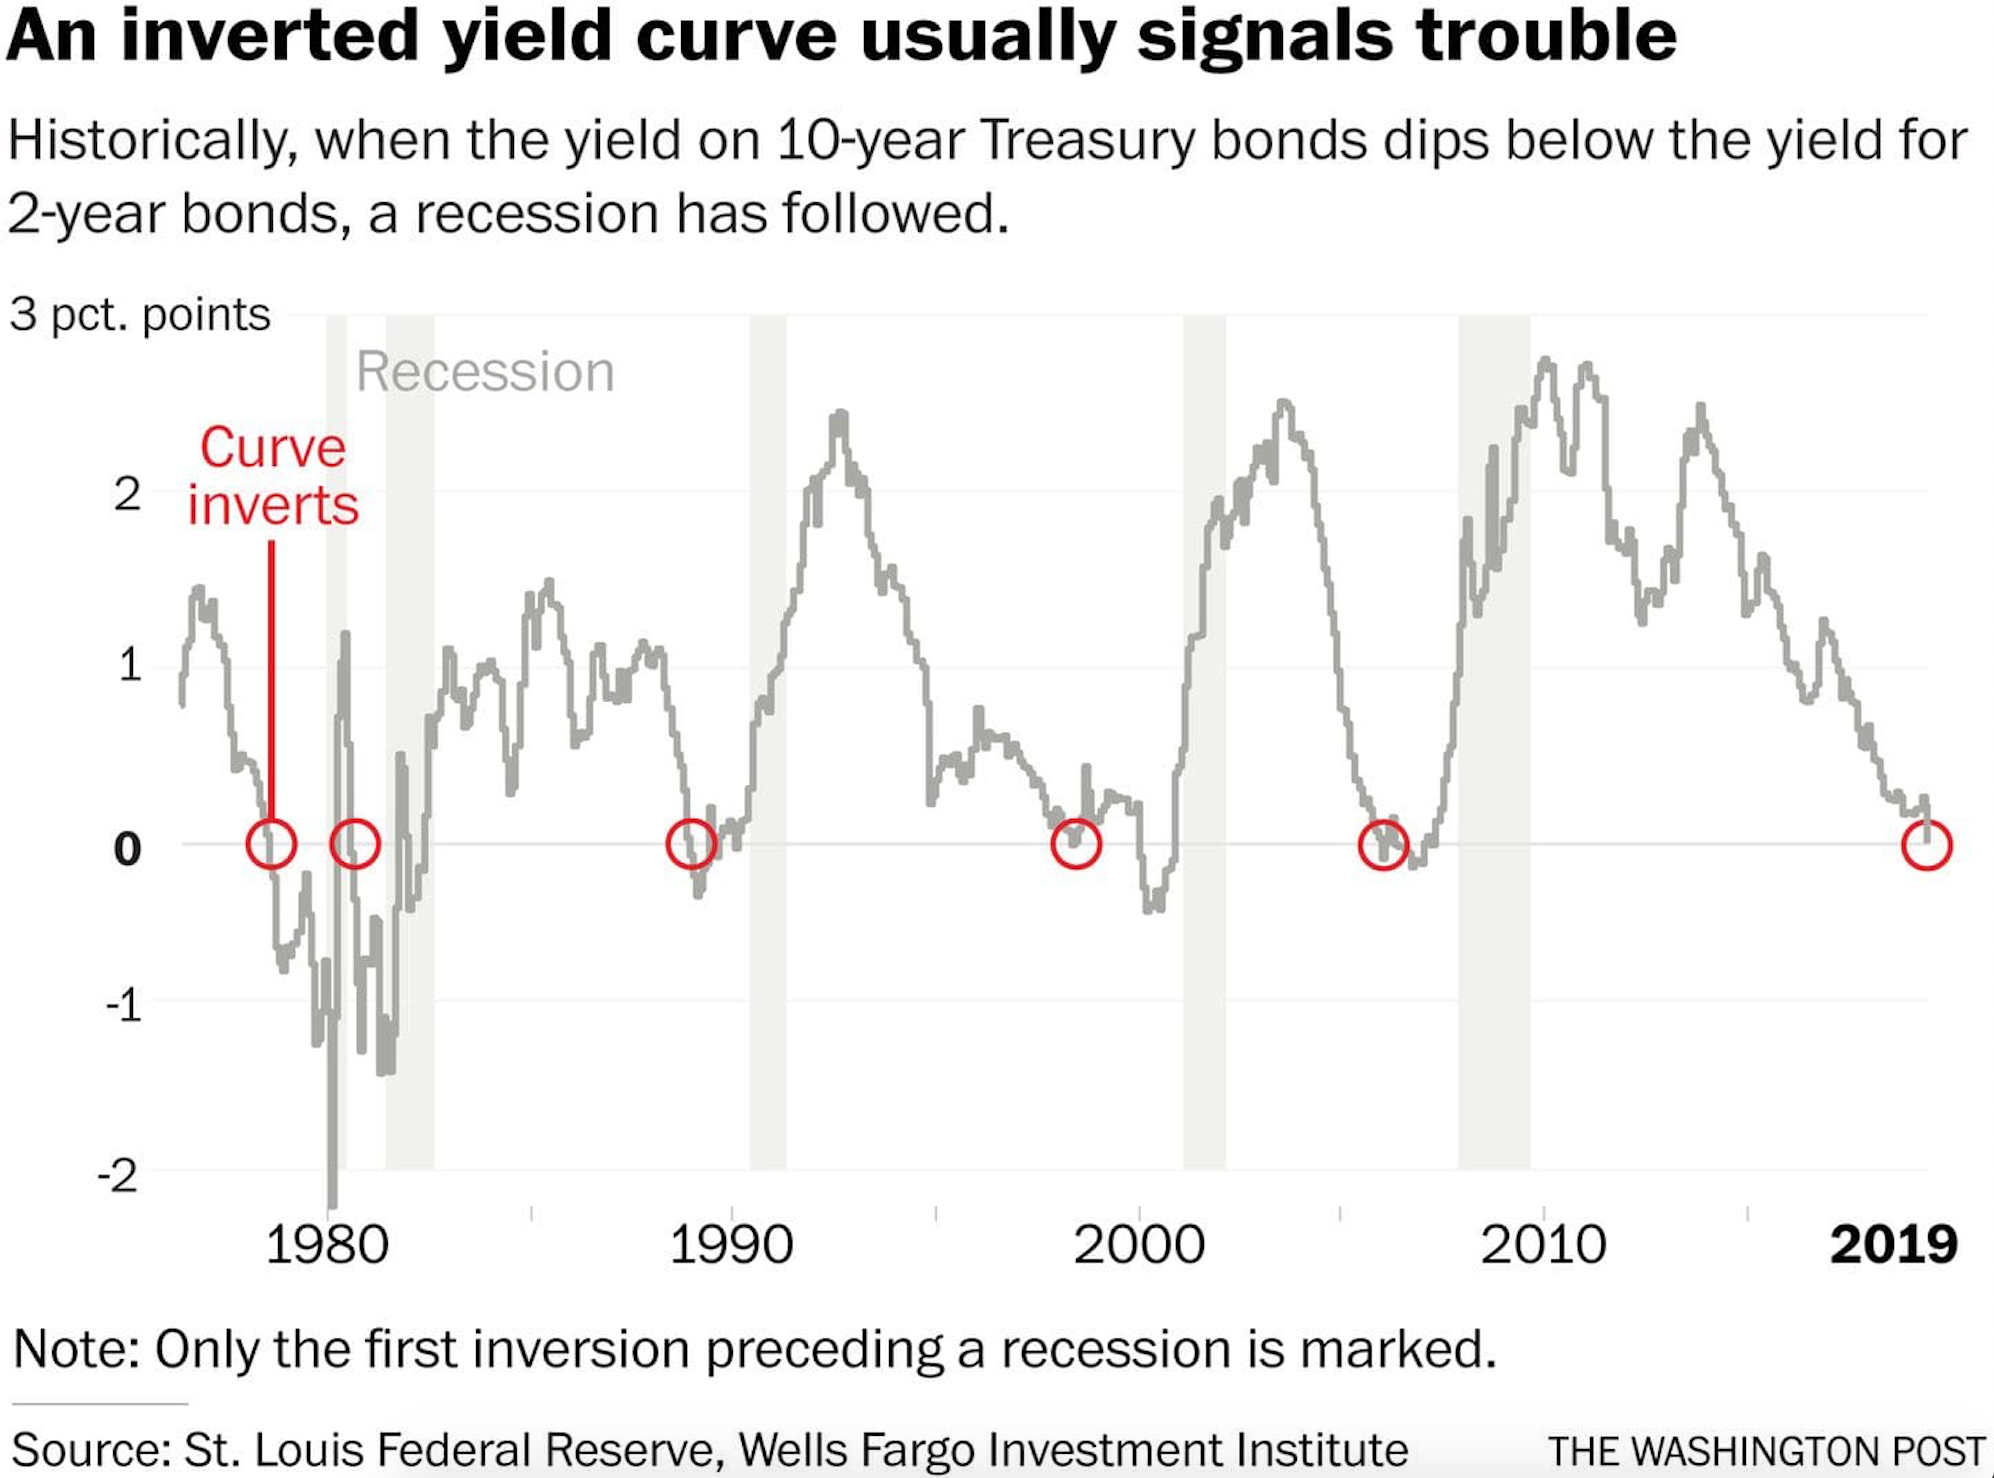 Inverted Yield Curve